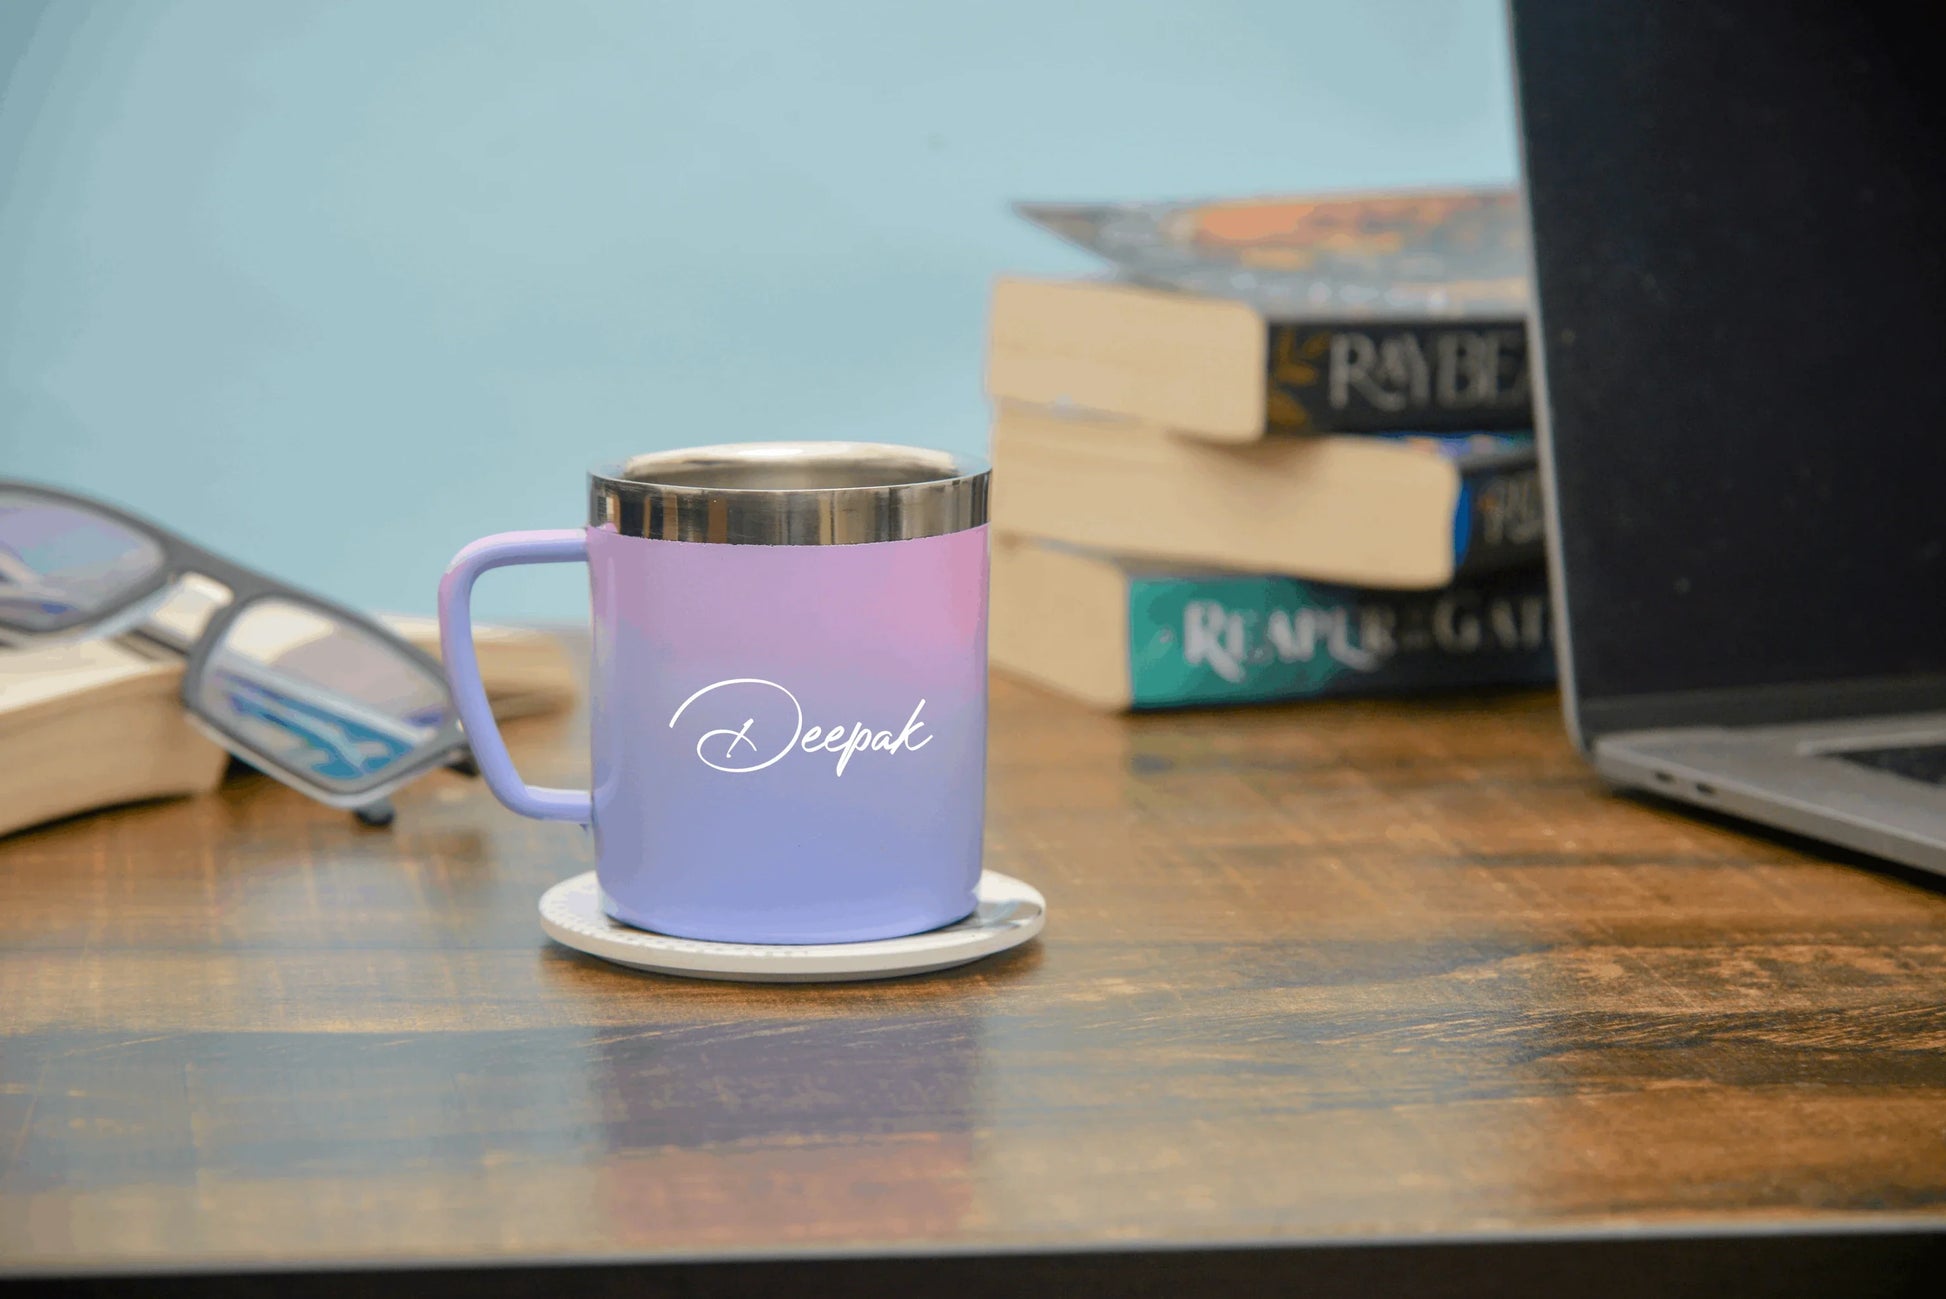 Don't settle for basic. Make every cheers more memorable with such a fantabulous mug adorning your name